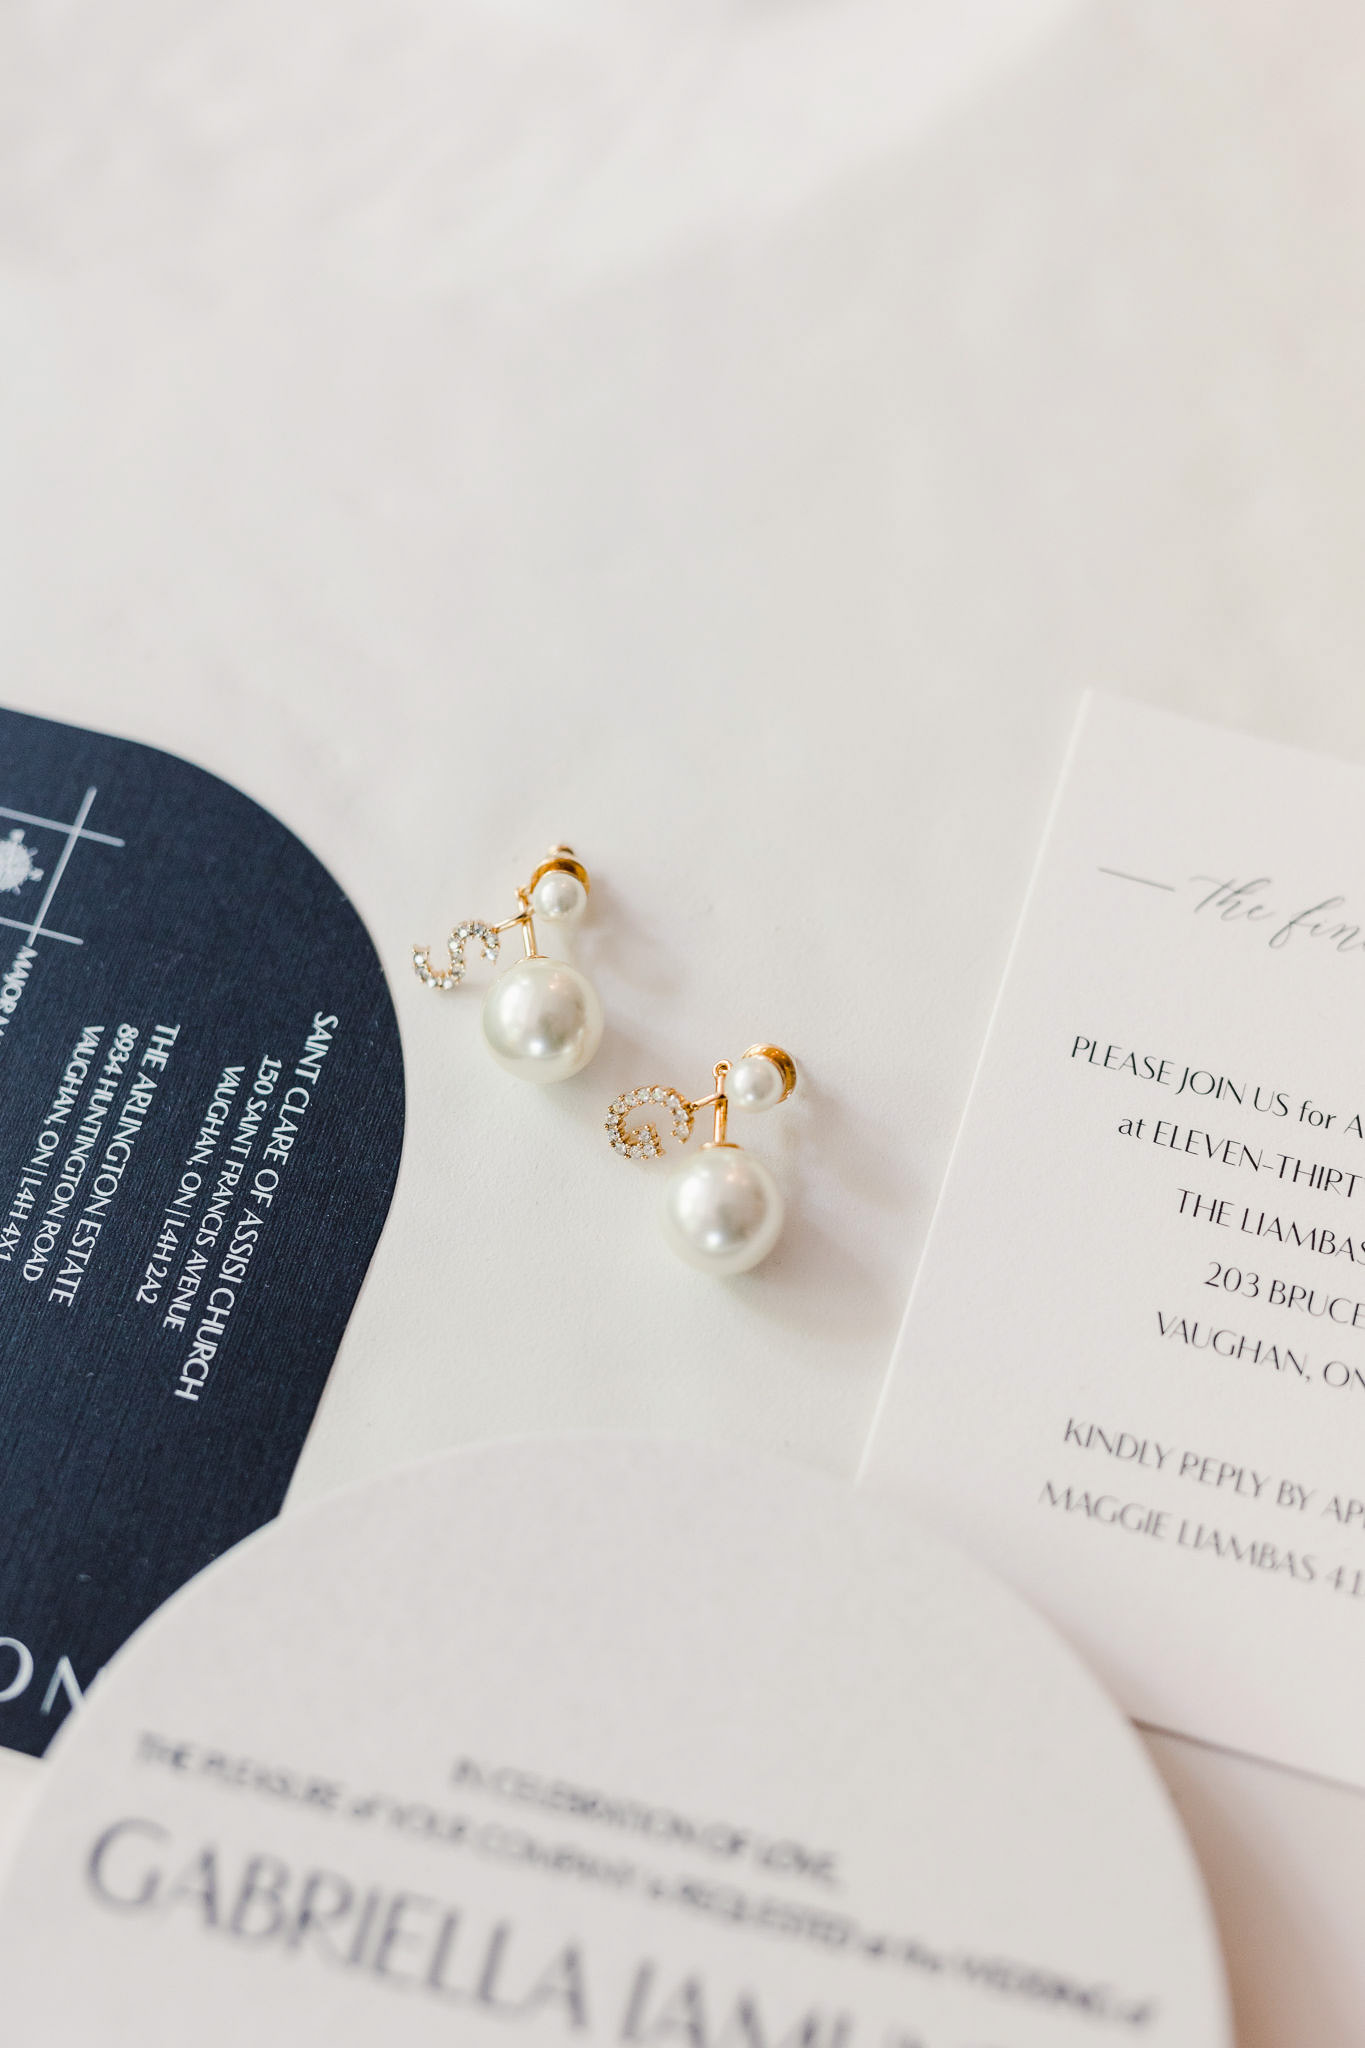 Pearl stud earrings and a wedding invitation on a white table.